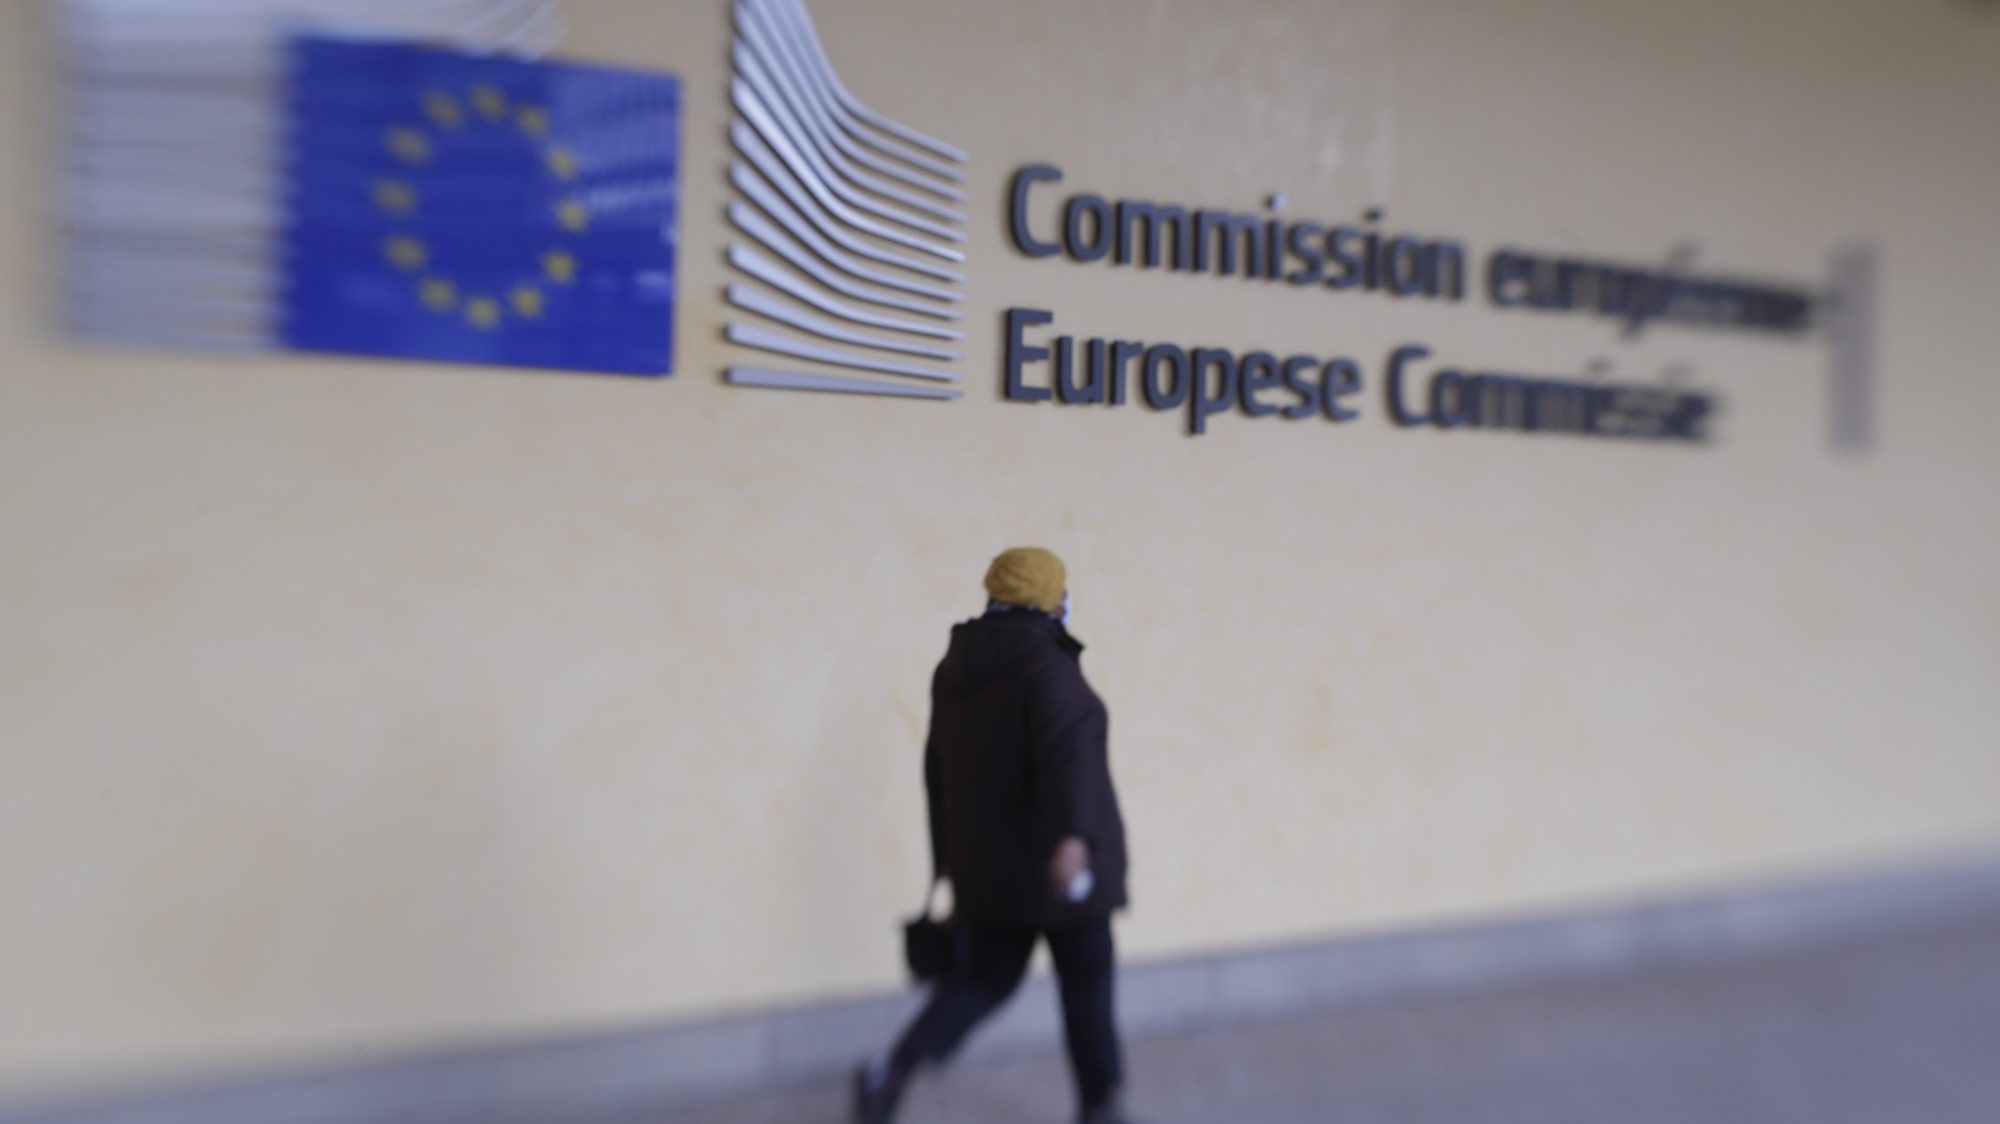 epa08795886 A picture taken with Lensbaby shows a person walking in front of European Commission headquarters in Brussels, Belgium, 03 November 2020.  EPA/OLIVIER HOSLET Taken with Lensbaby